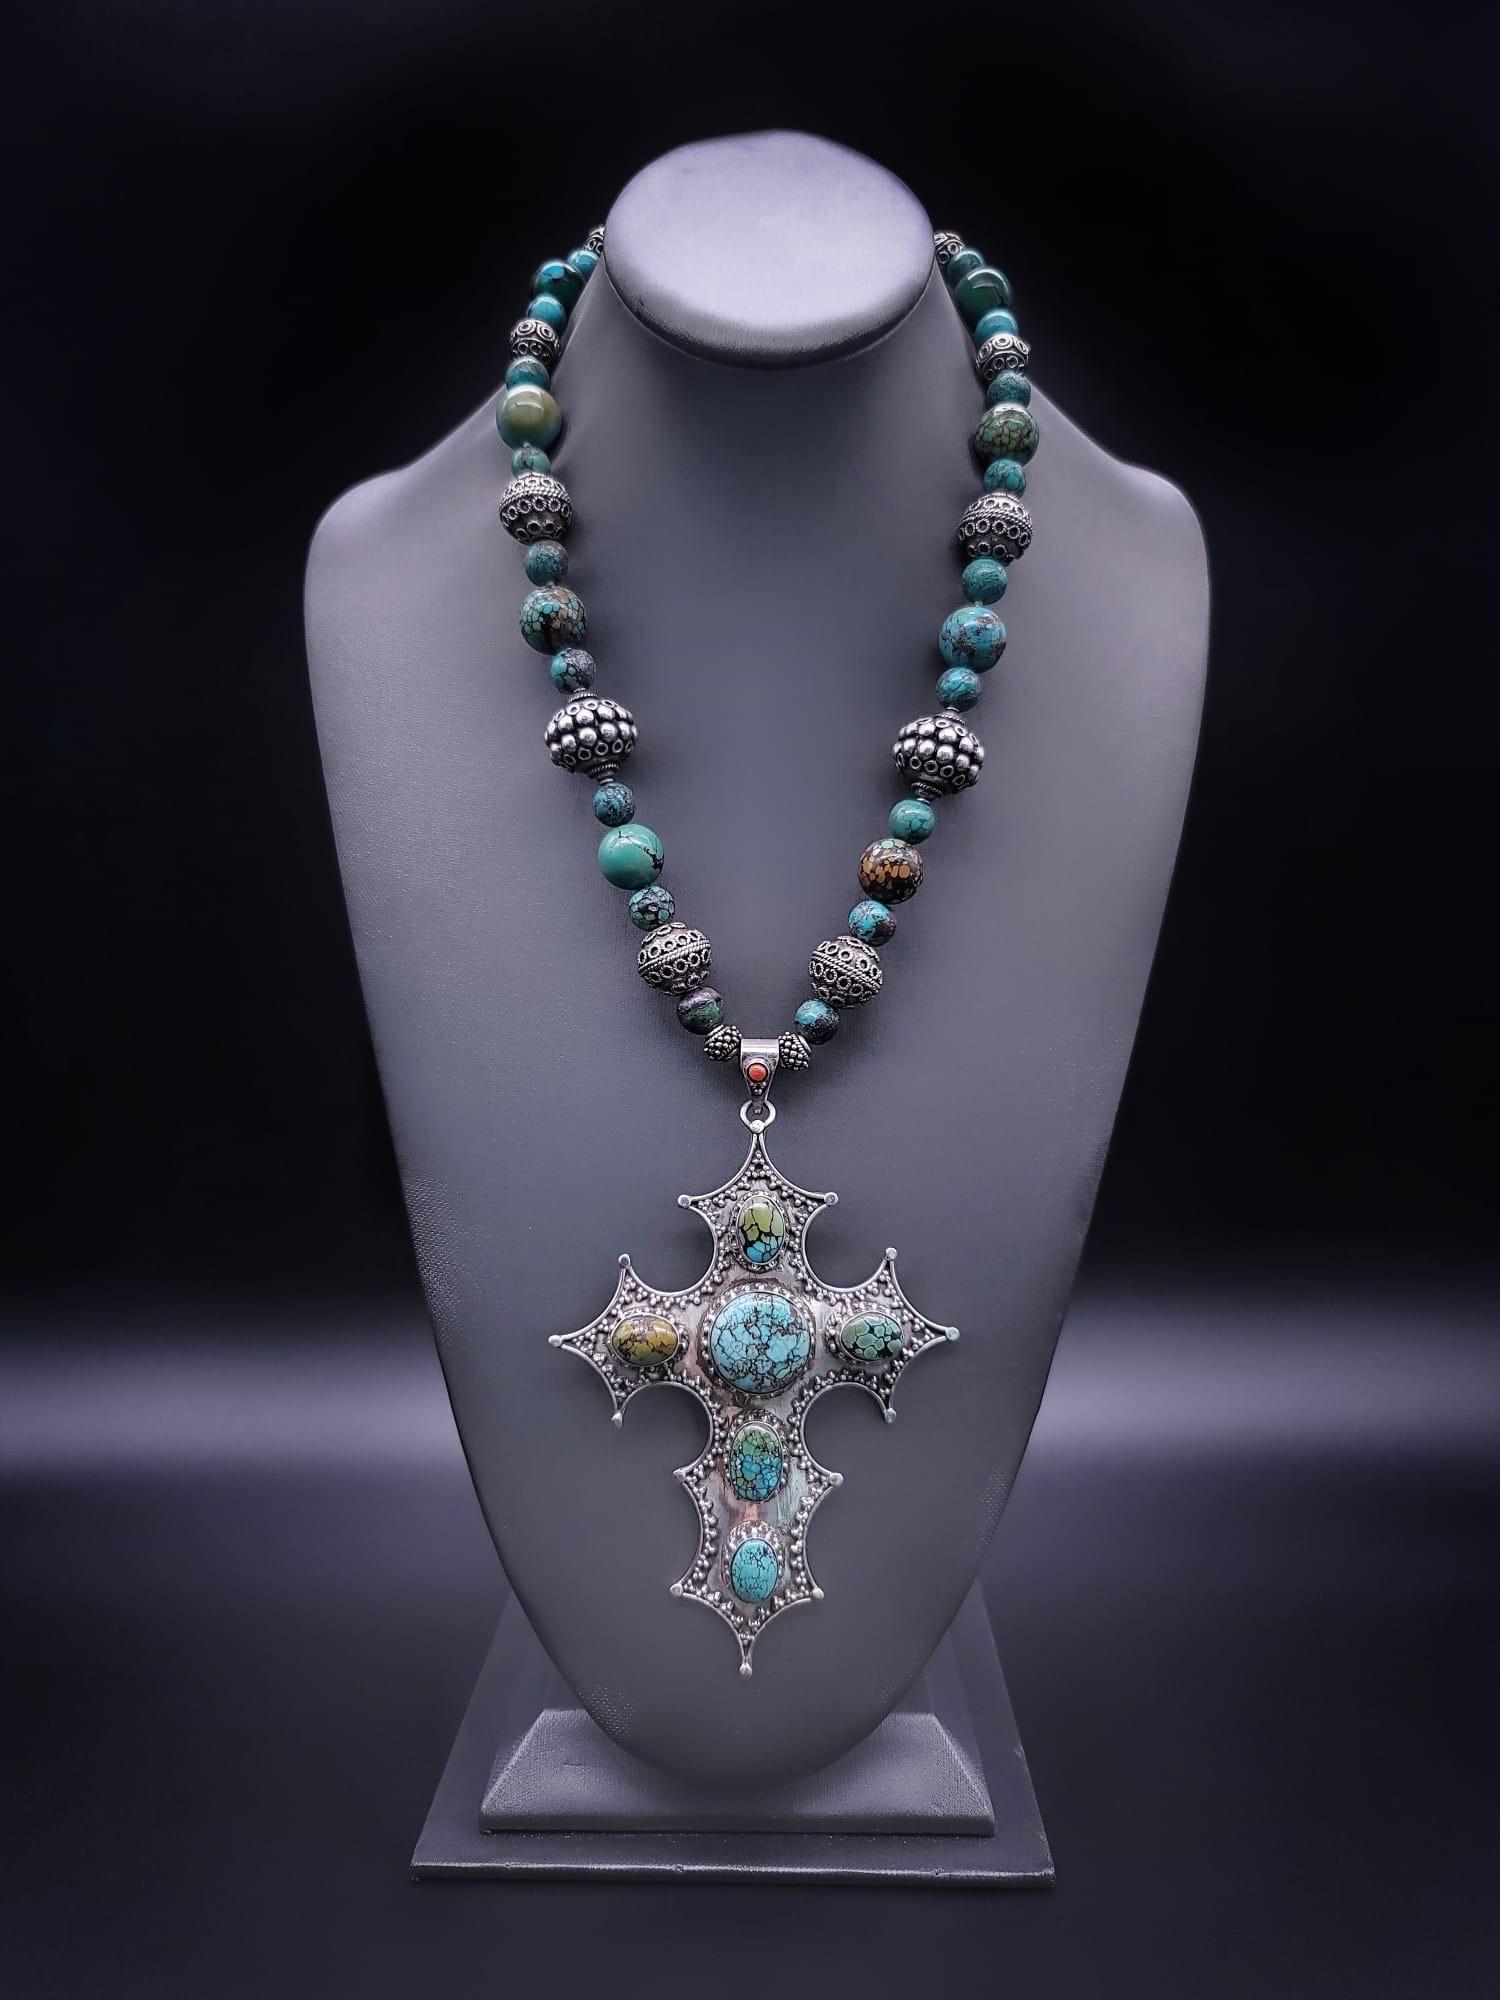 A.Jeschel Magnificent Sterling Silver Cross inlaid with Turquoise necklace. For Sale 3